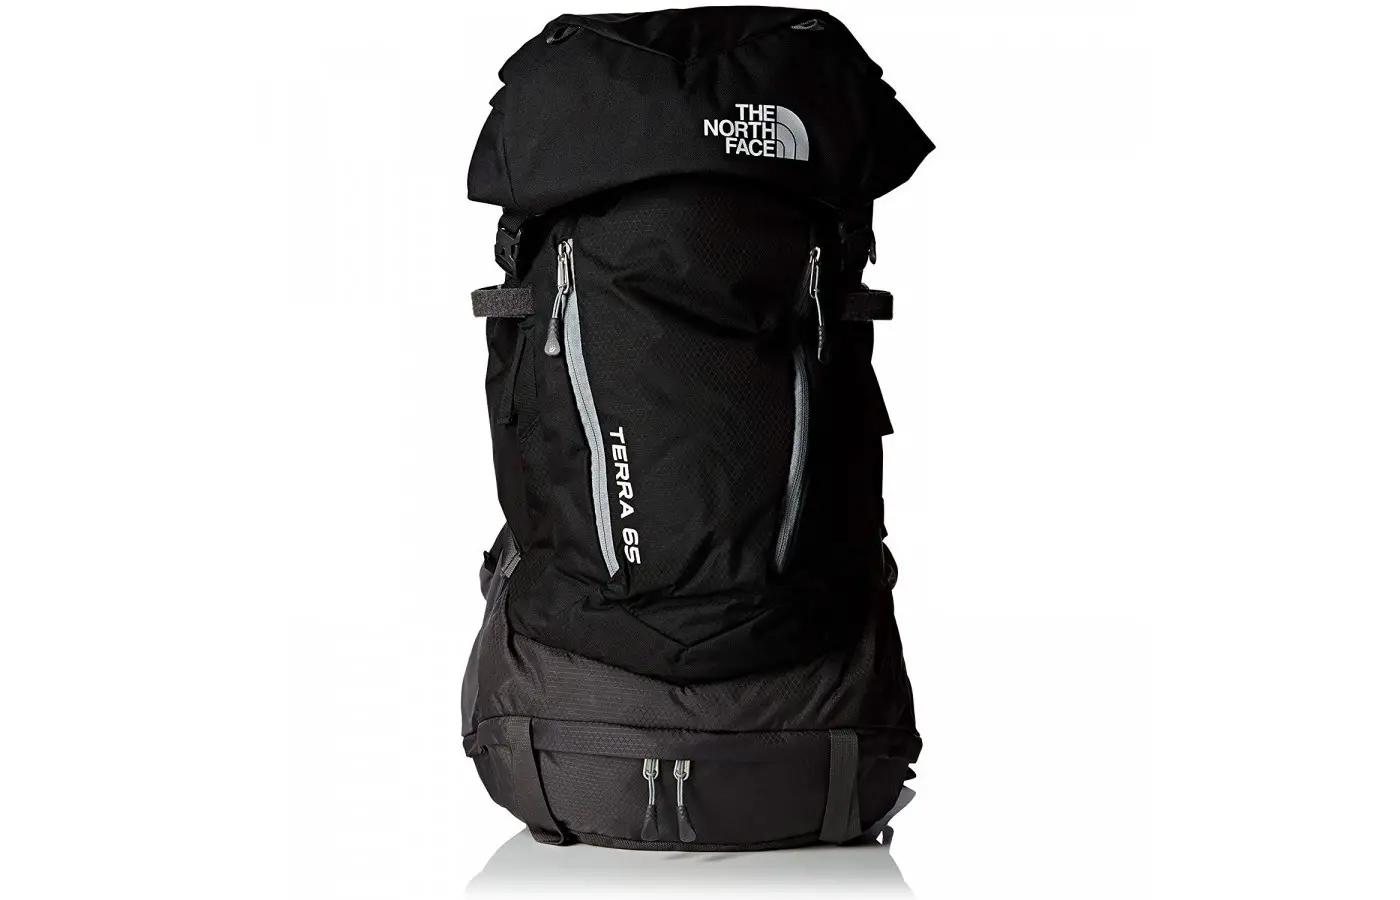 The North Face Terra 65 offers a 65-liter capacity for larger loads. 